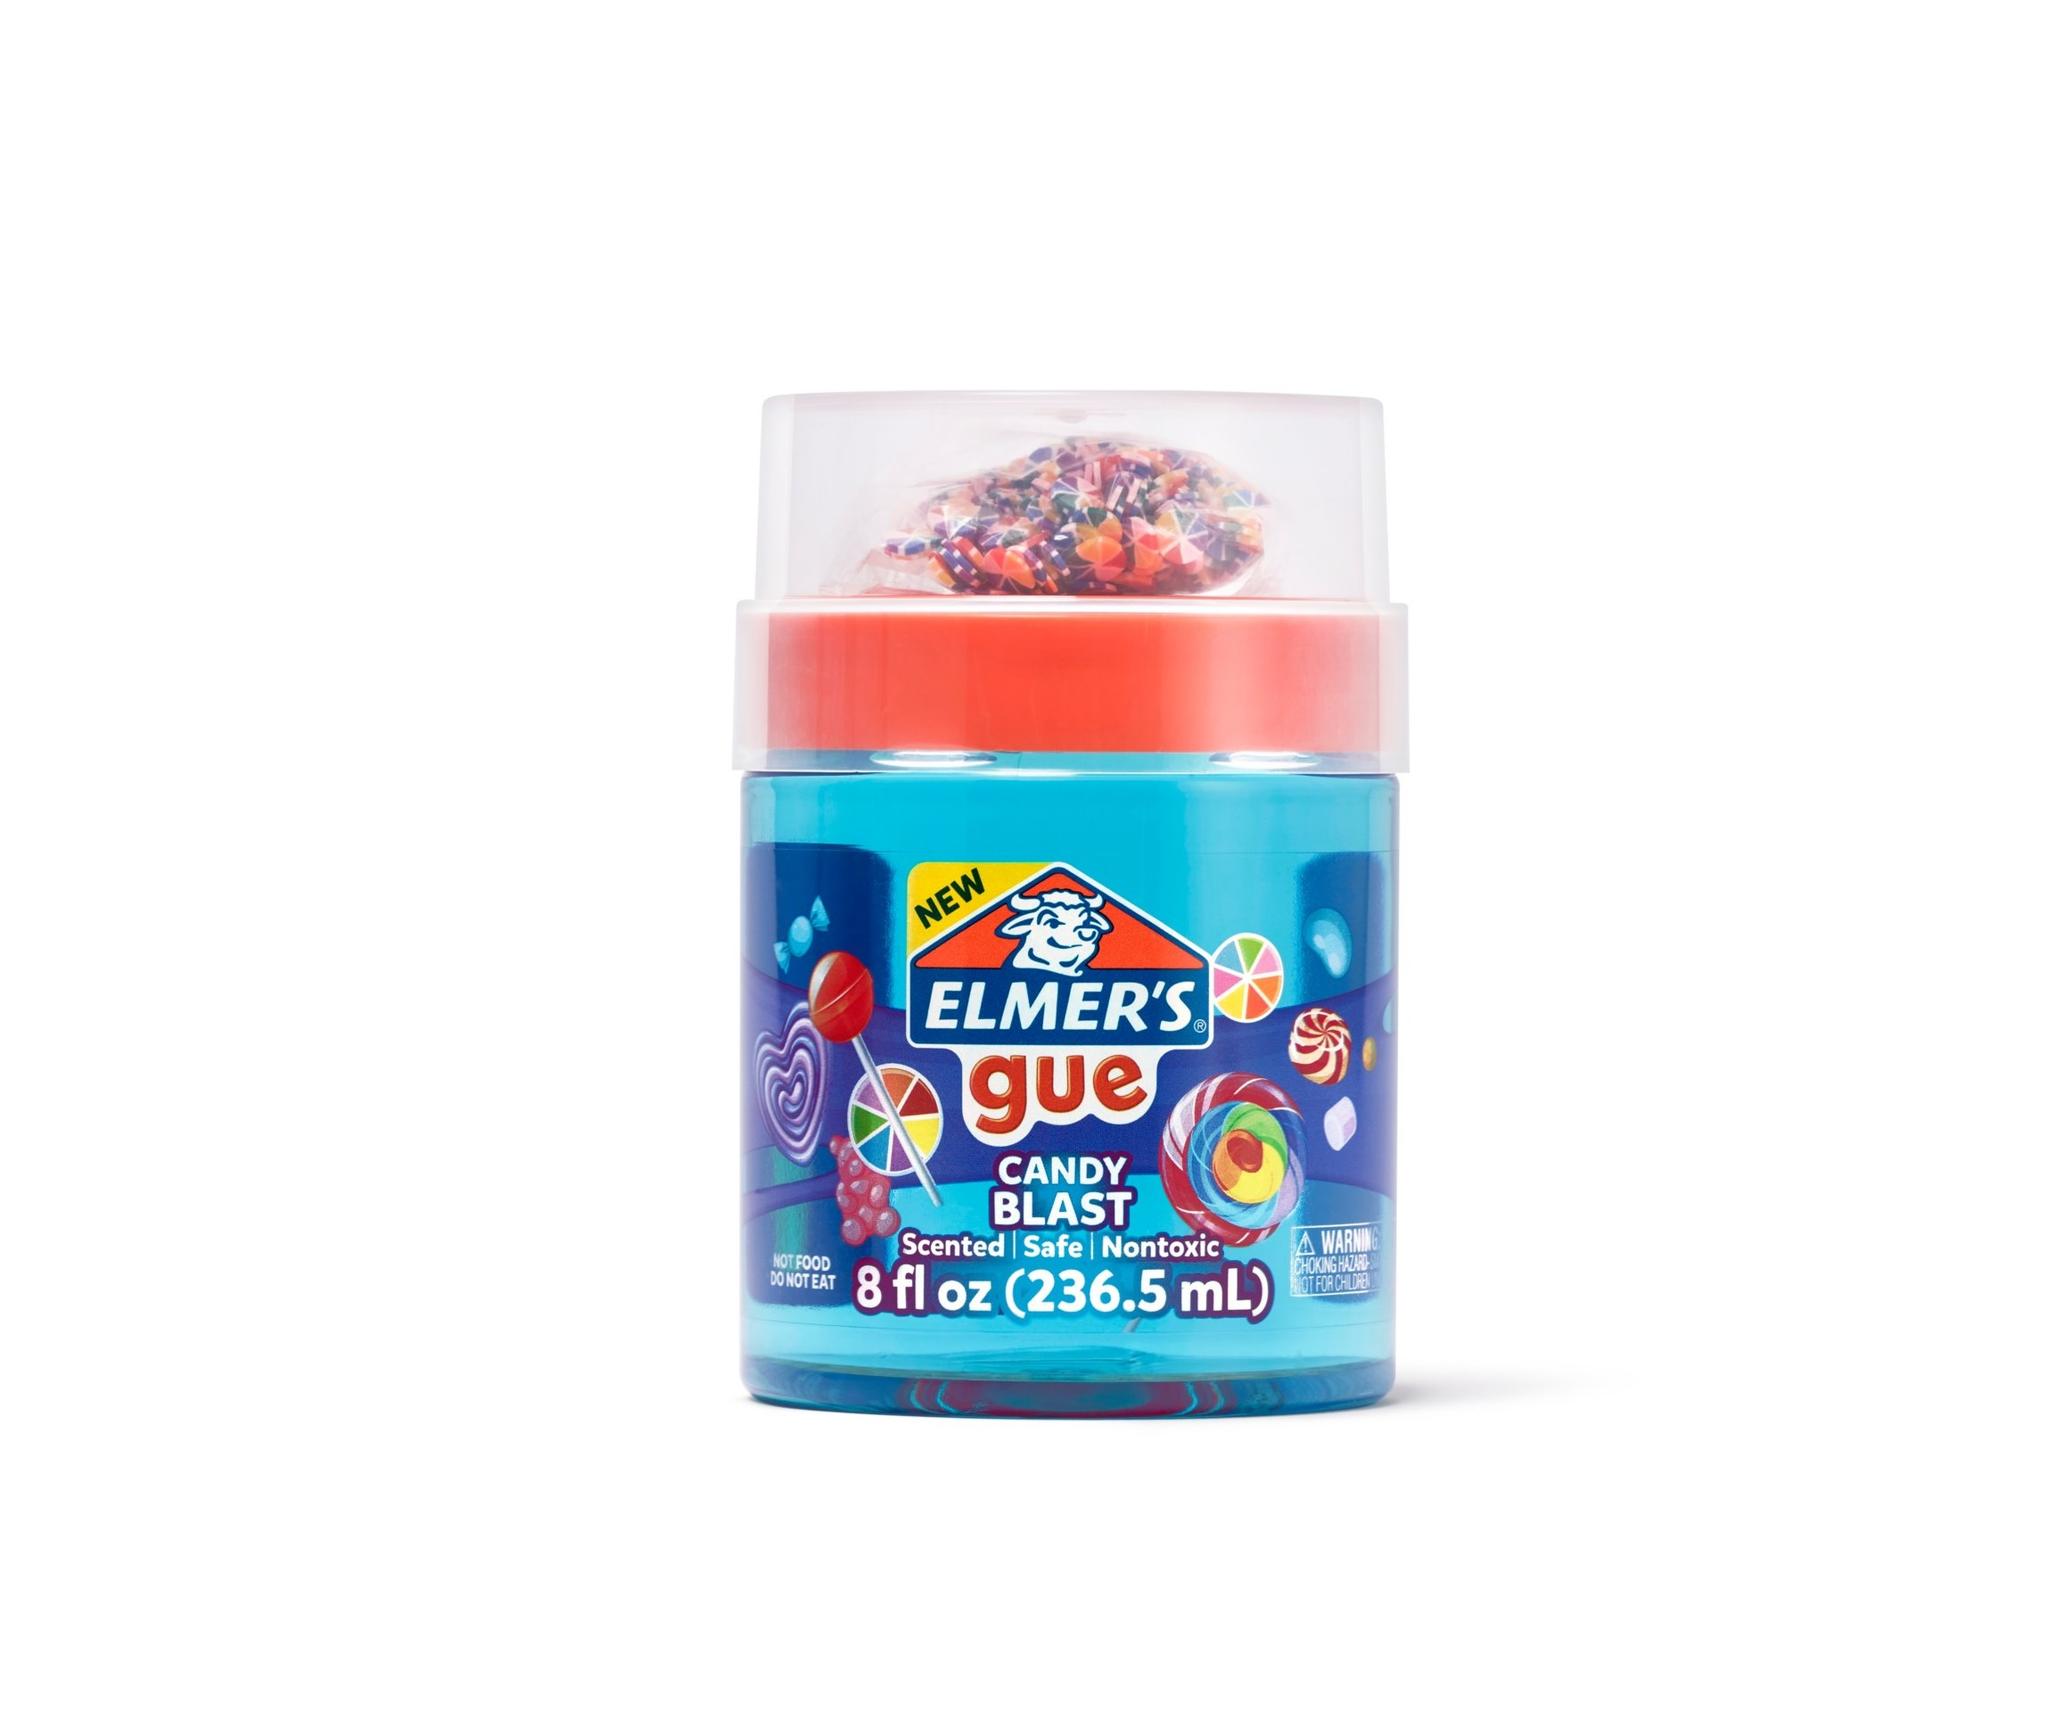 SLIME ELMERS GUE CANDY BLAST (2194458)